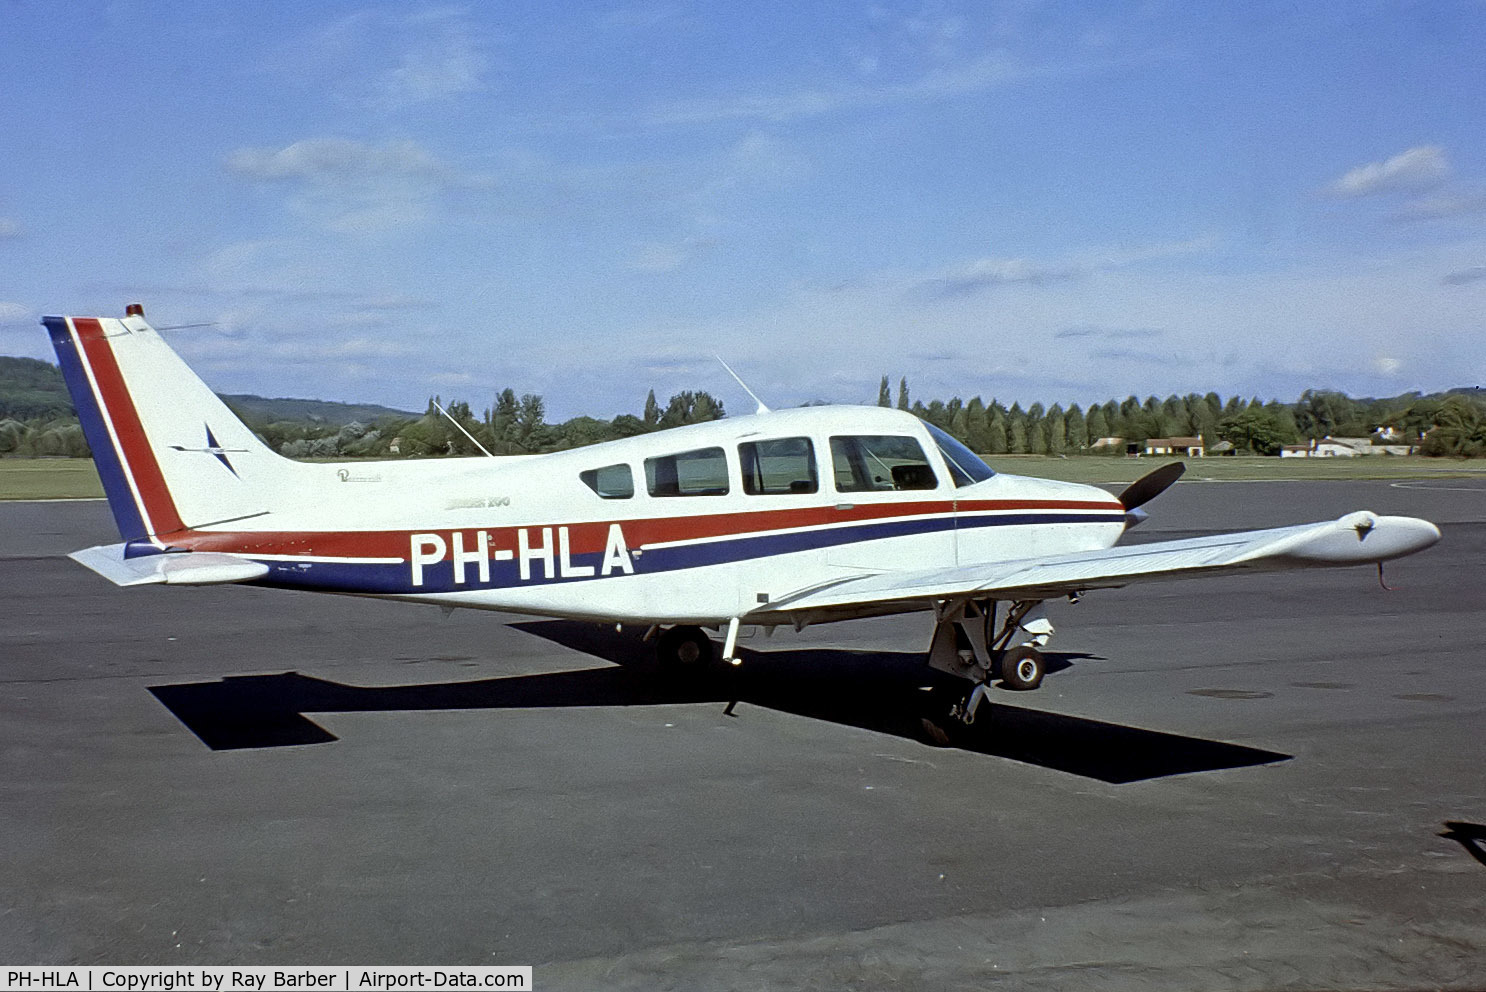 PH-HLA, 1977 Beech C24R Sierra Super C/N MC-491, Beech C24R Sierra [MC-491] (Place & Date Unknown) @1978 From a slide.